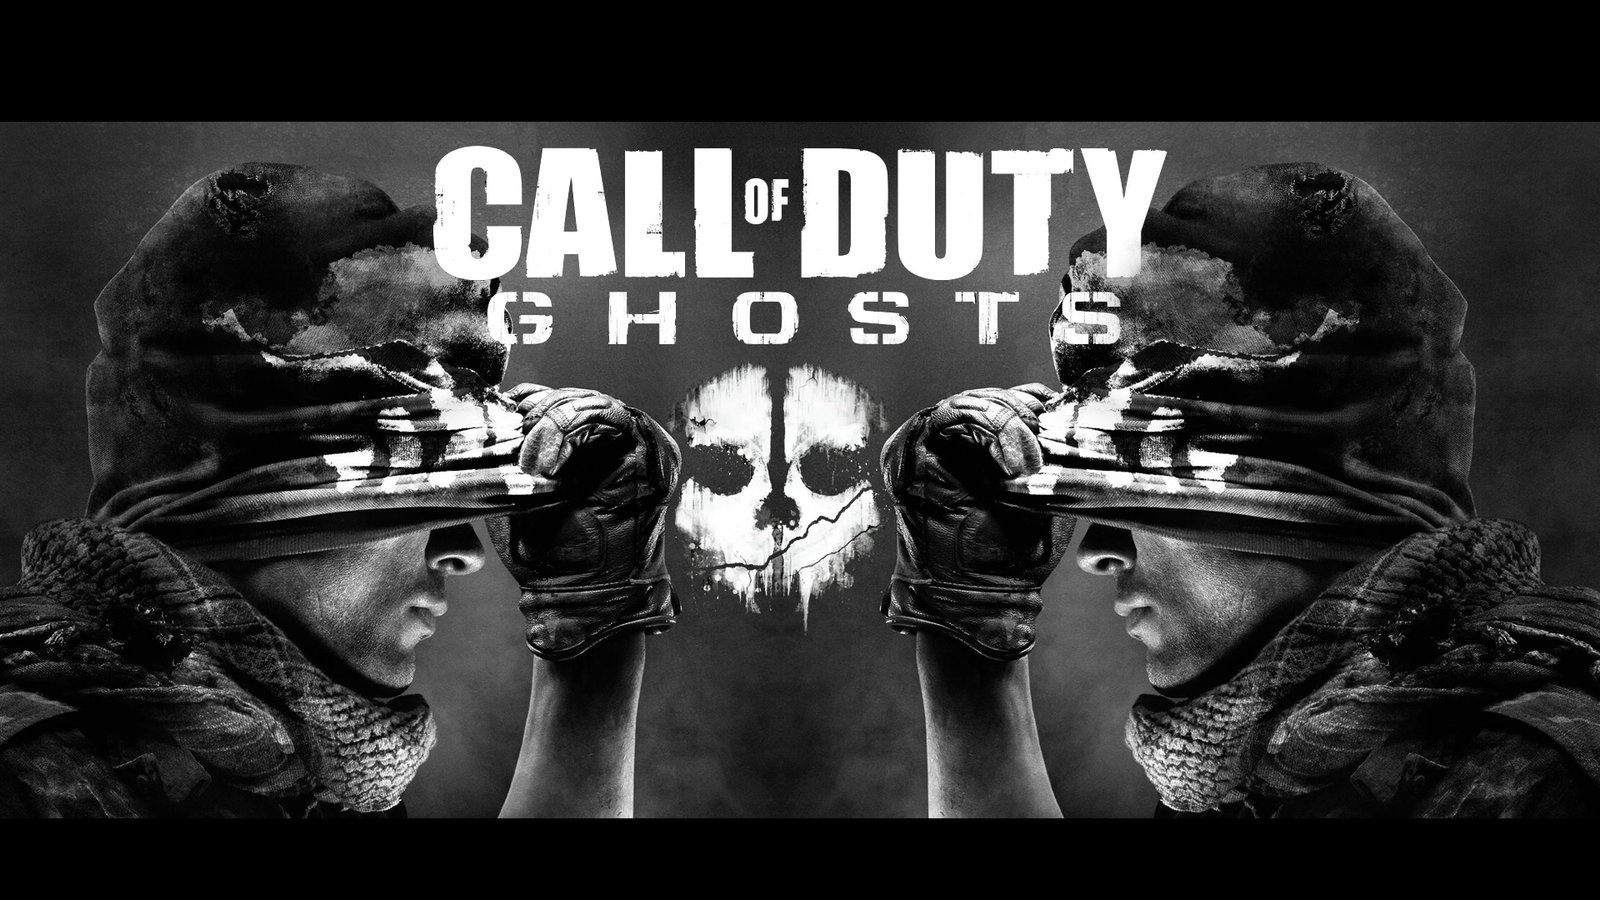 call of duty ghosts 2 wallpaper